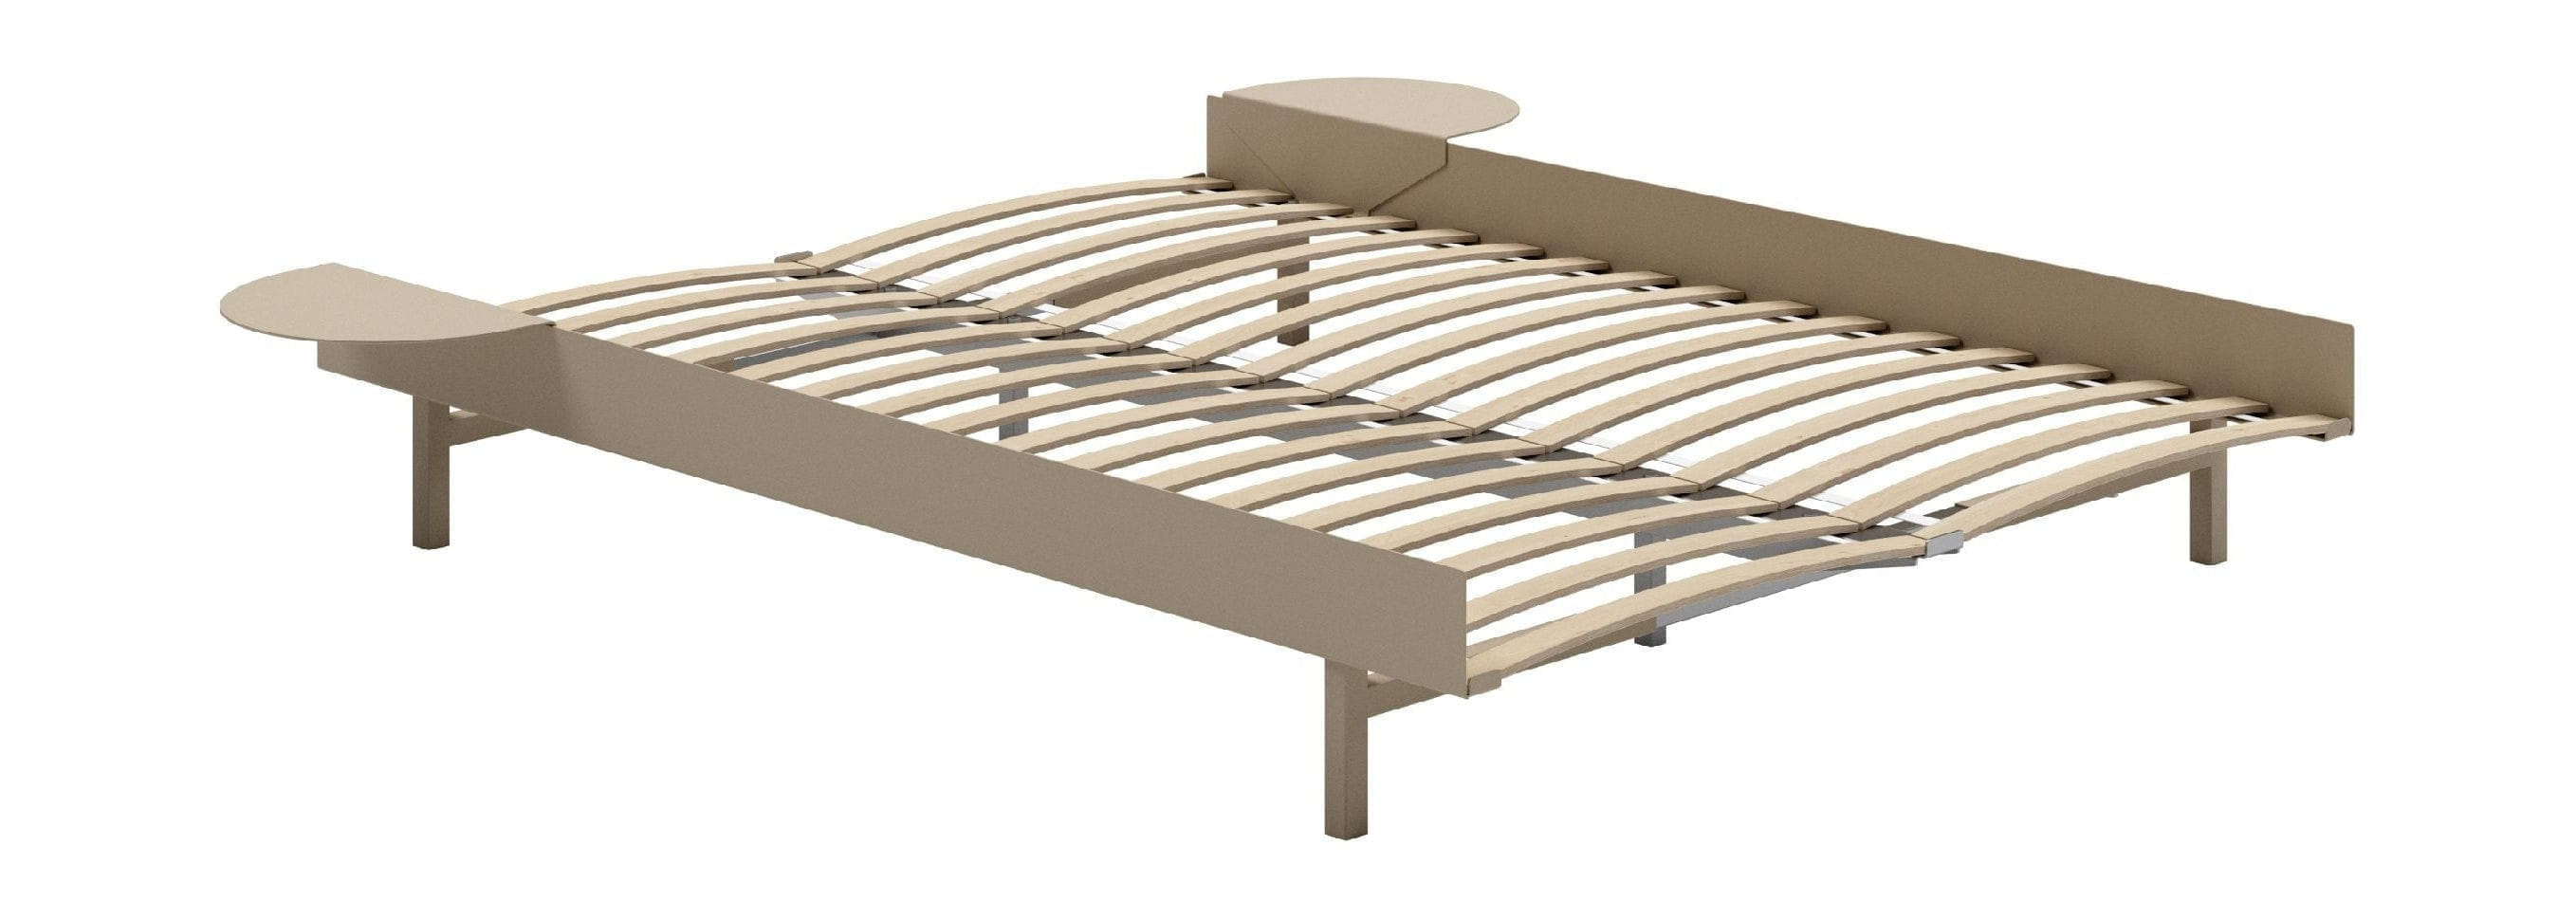 Moebe Bed With Slats And 2 Bedside Tables 140 Cm, Sand